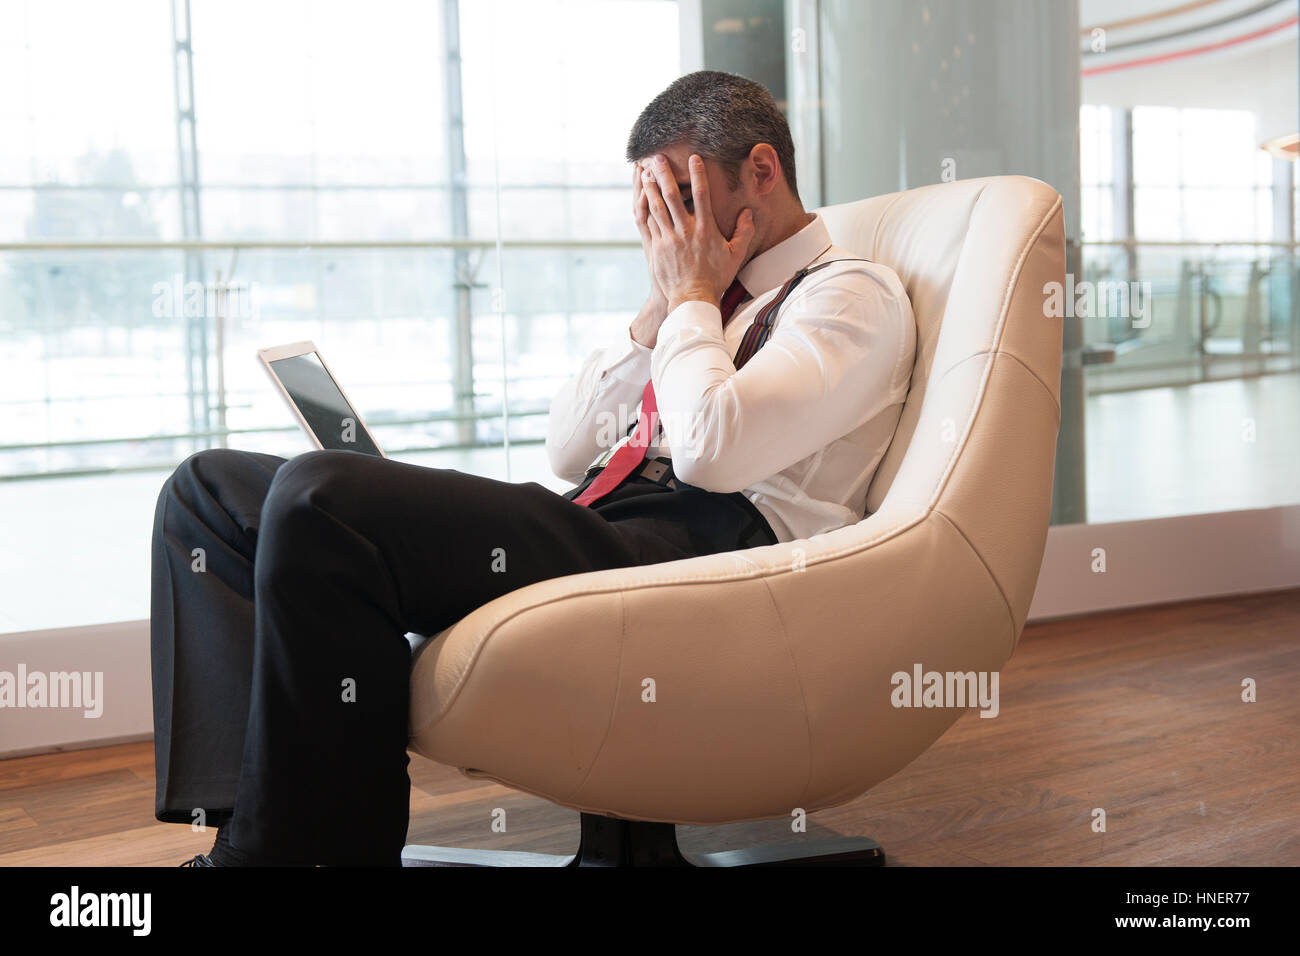 Stressed out businessman covers face with hands Stock Photo